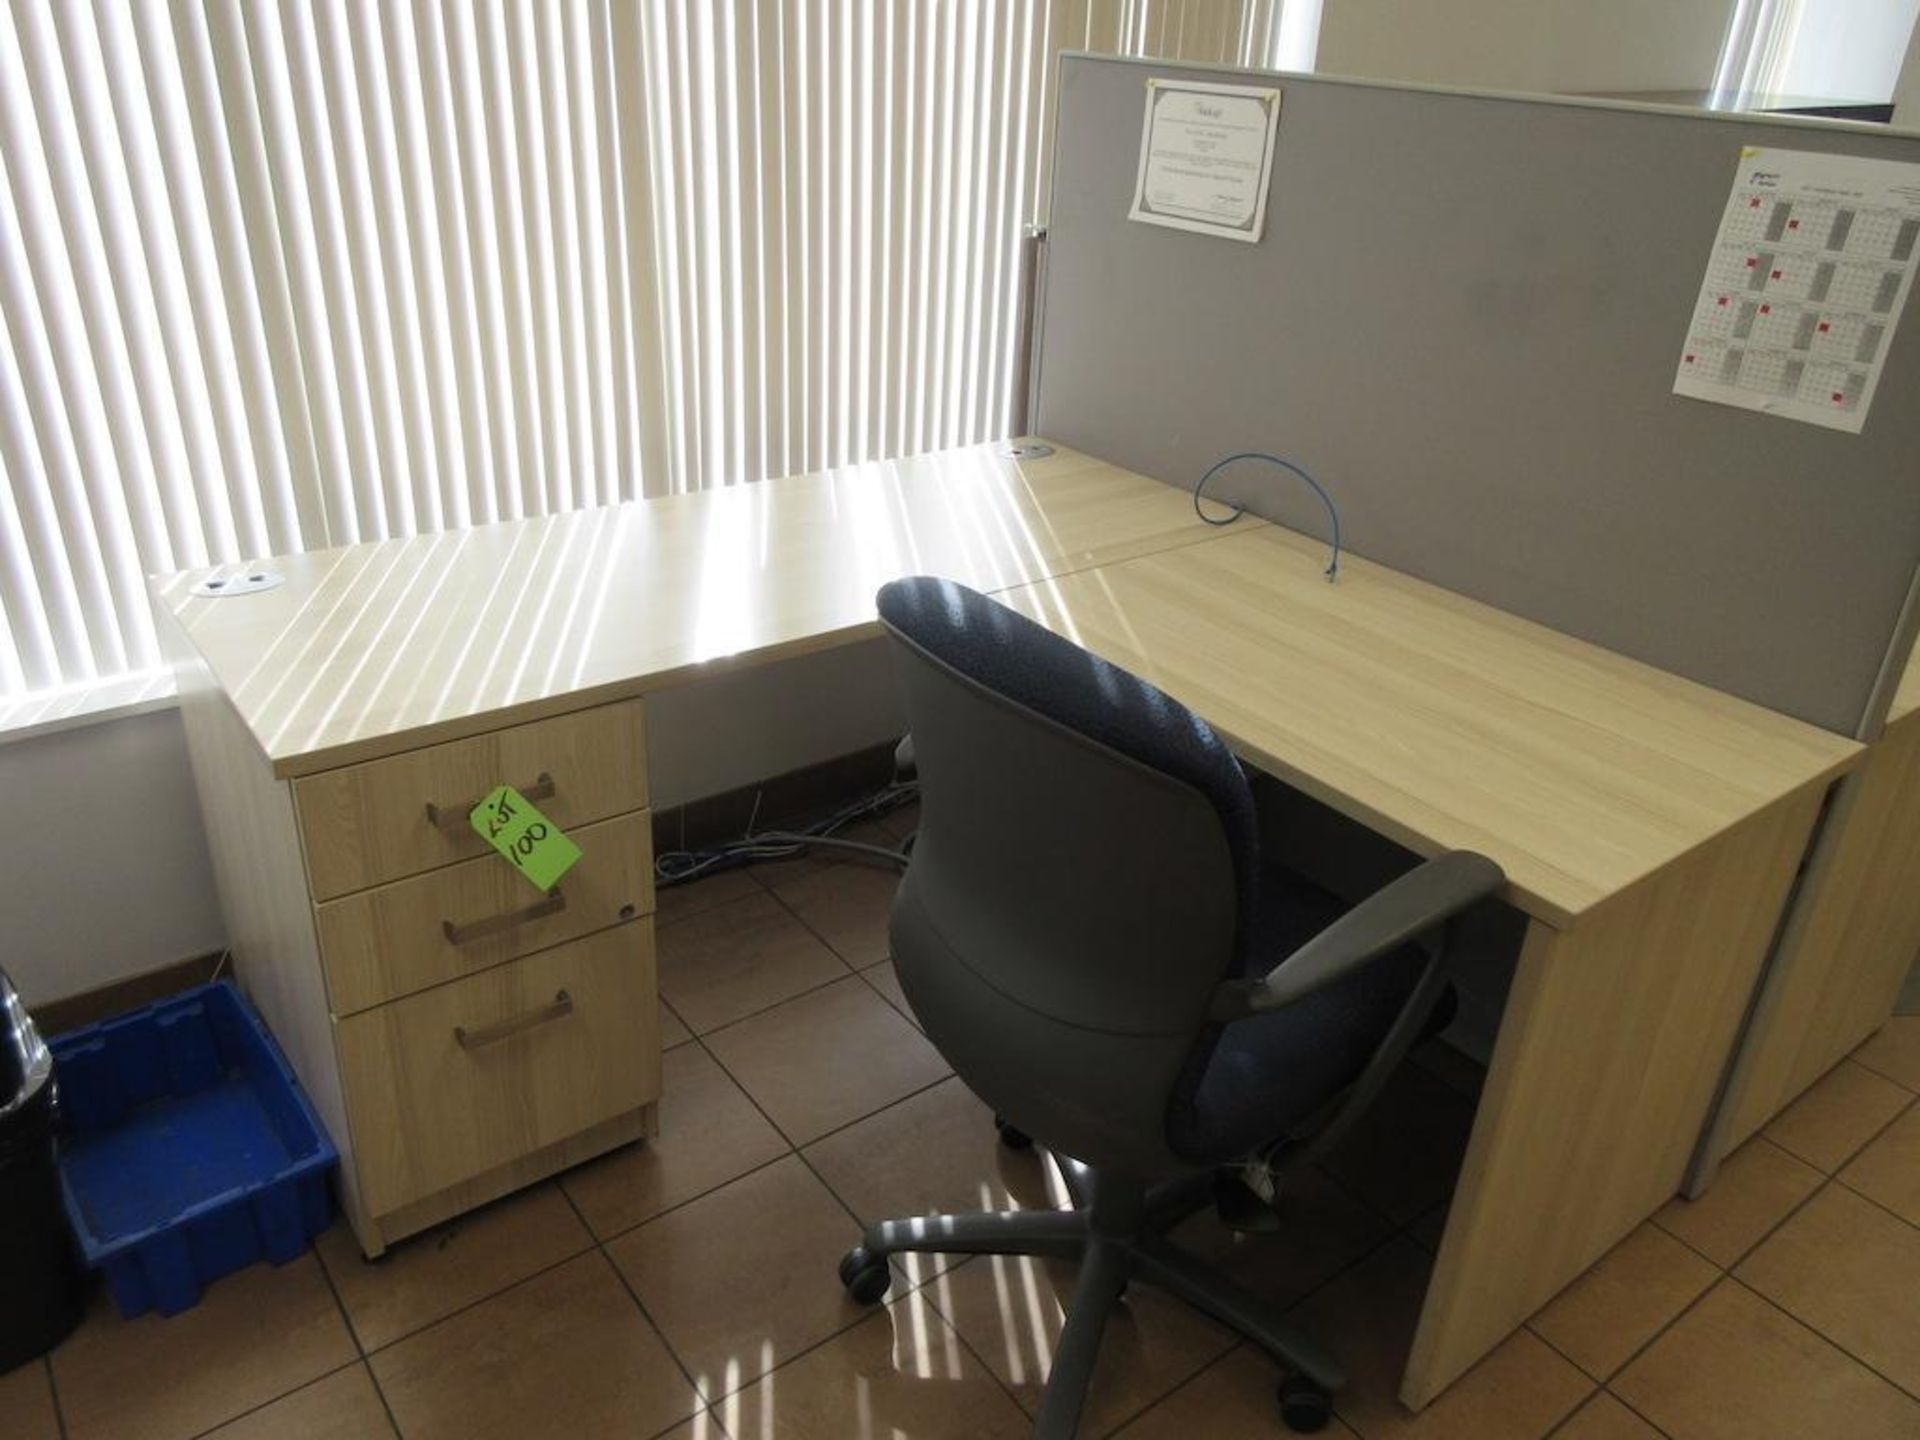 6 station grey office cubicles approx 60" x 60" x 60" w 6 light oak L shaped desks, 6 chairs, 4 dr l - Image 4 of 5